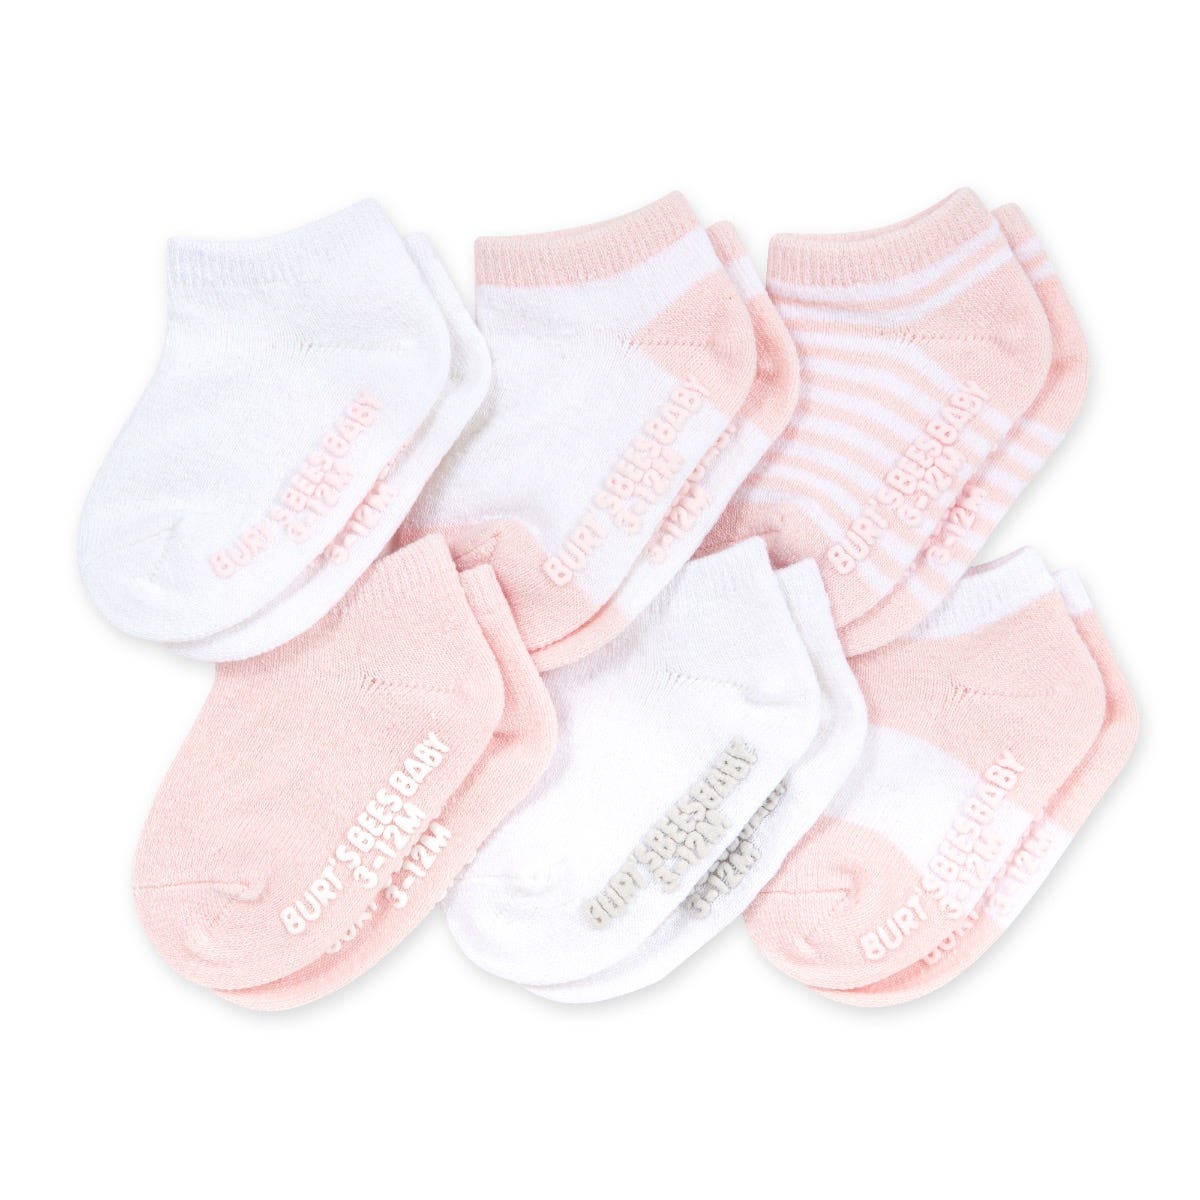 Baby Girls Cute Socks 3 Pairs 0-3 Months - UK Size 0-2 Pink Hearts & Stripes Design 